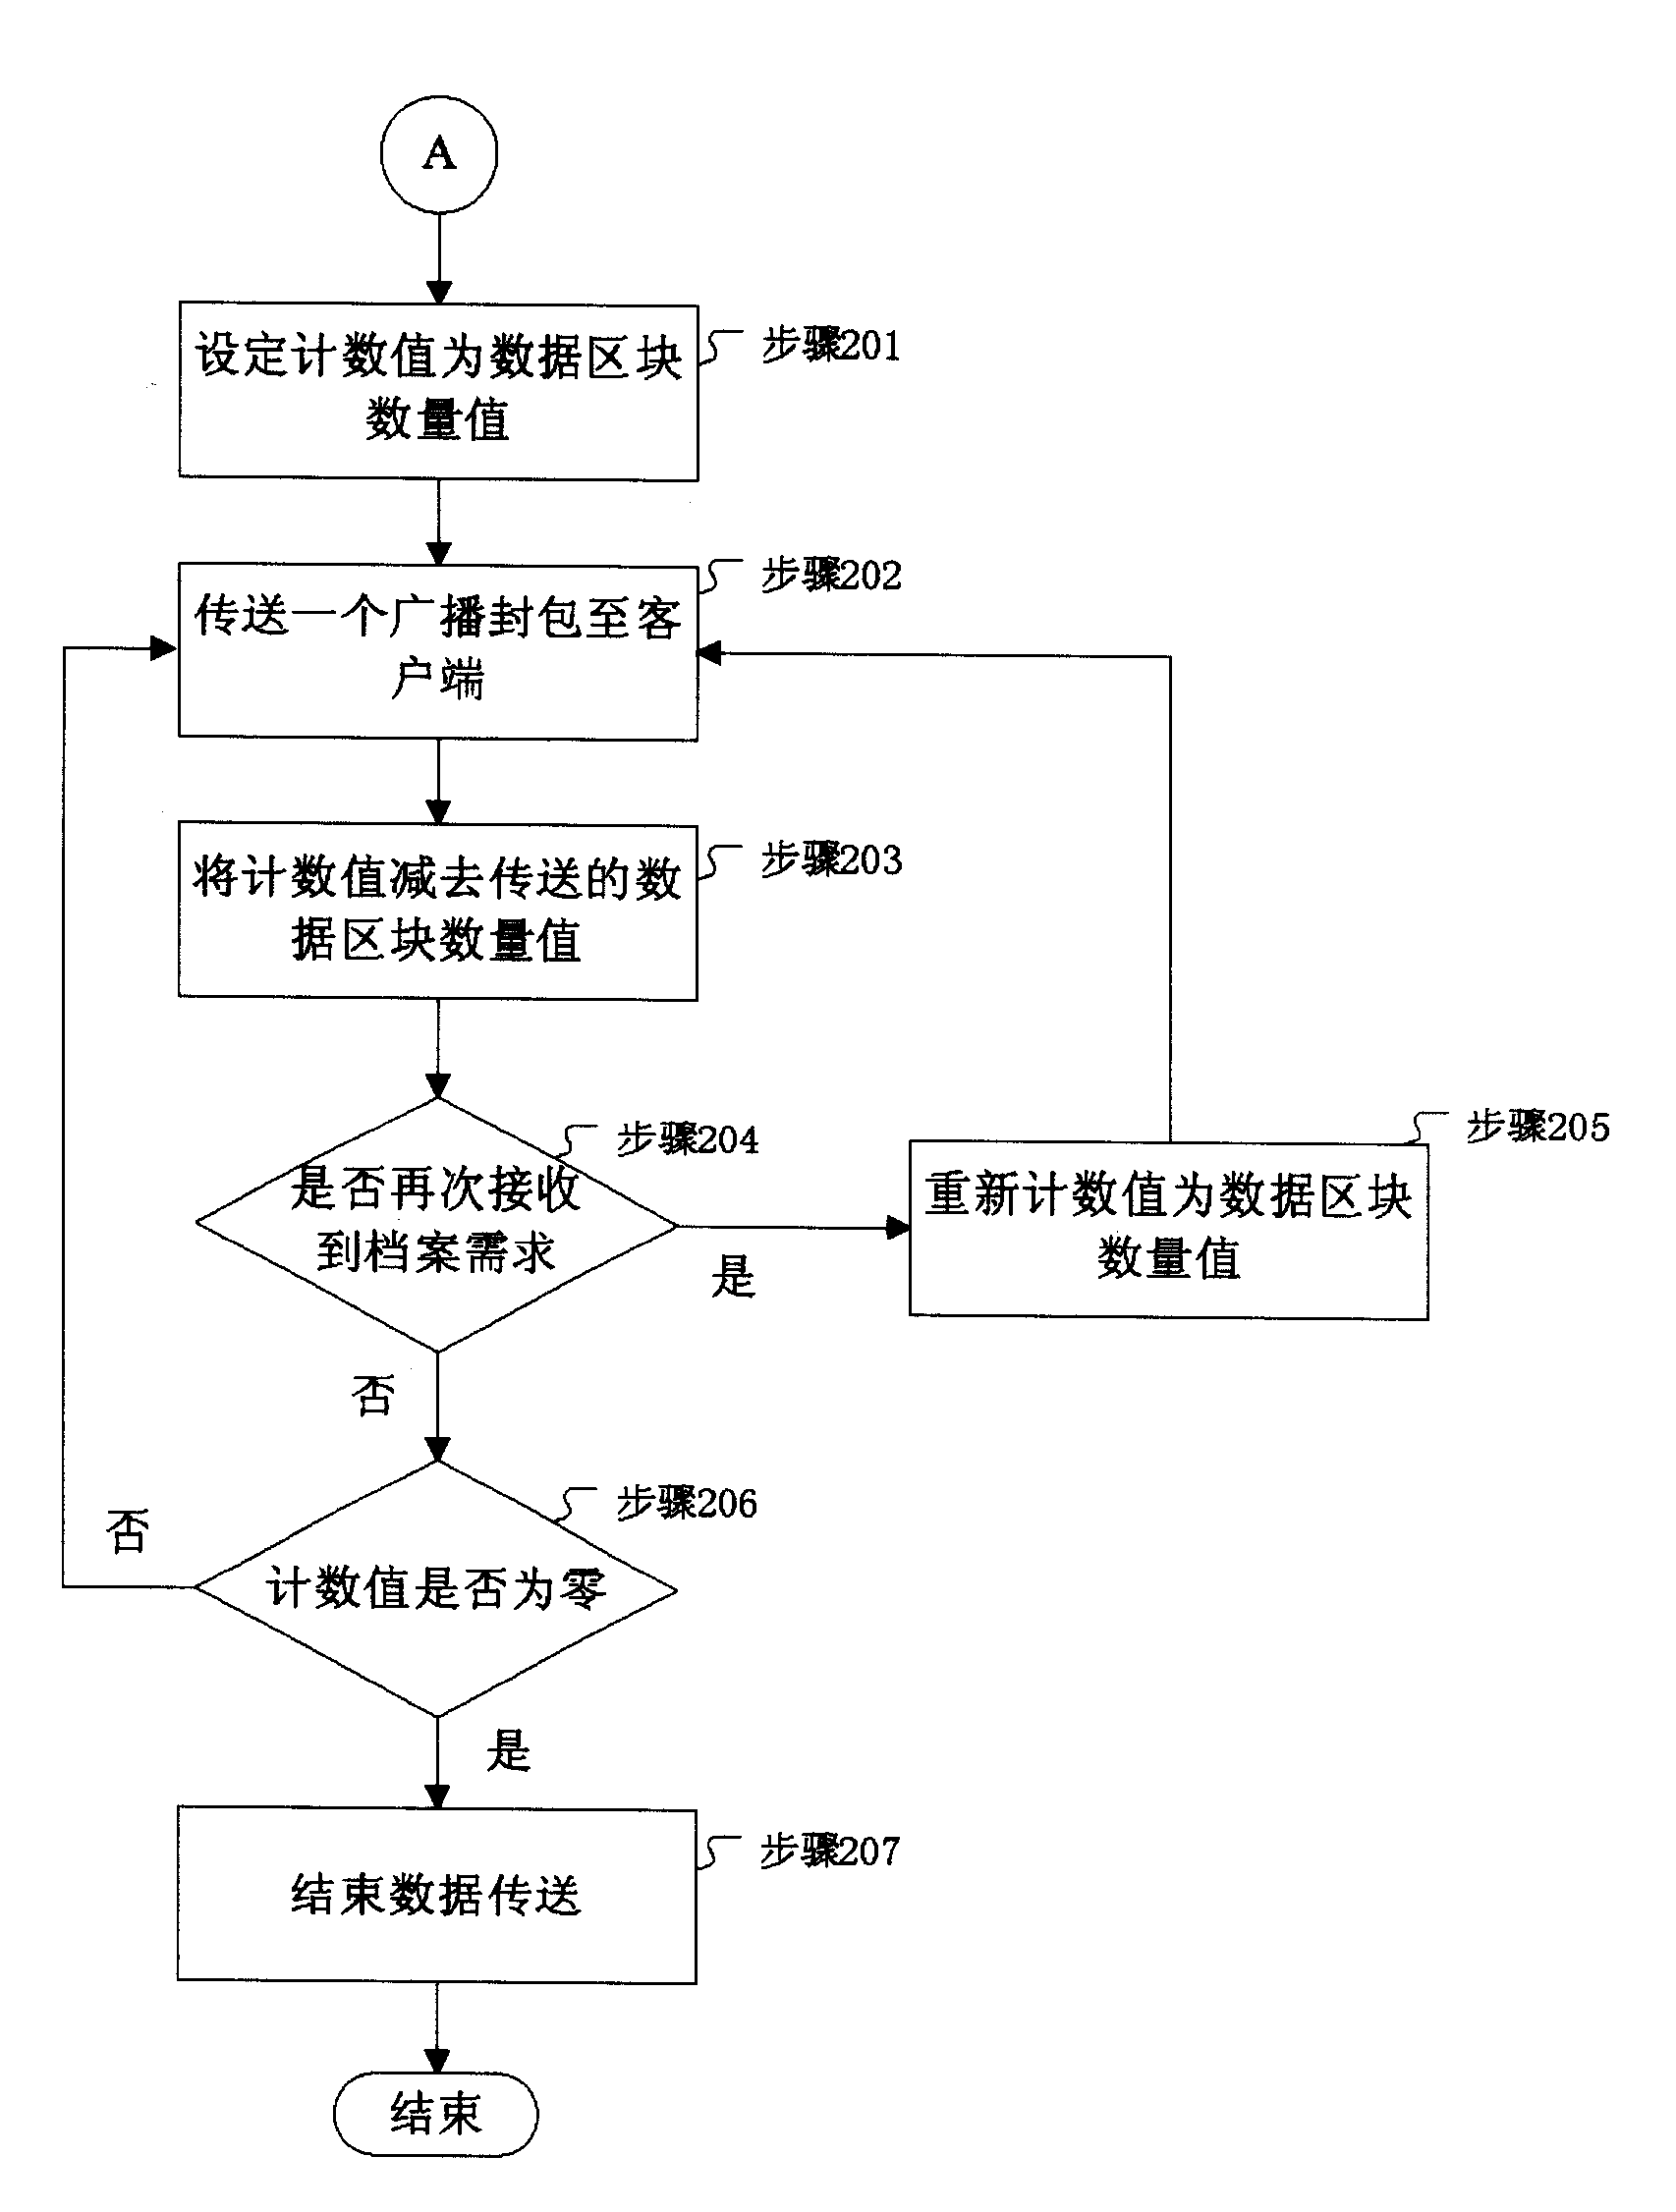 Method and system for receiving and transmitting data through network broadcast